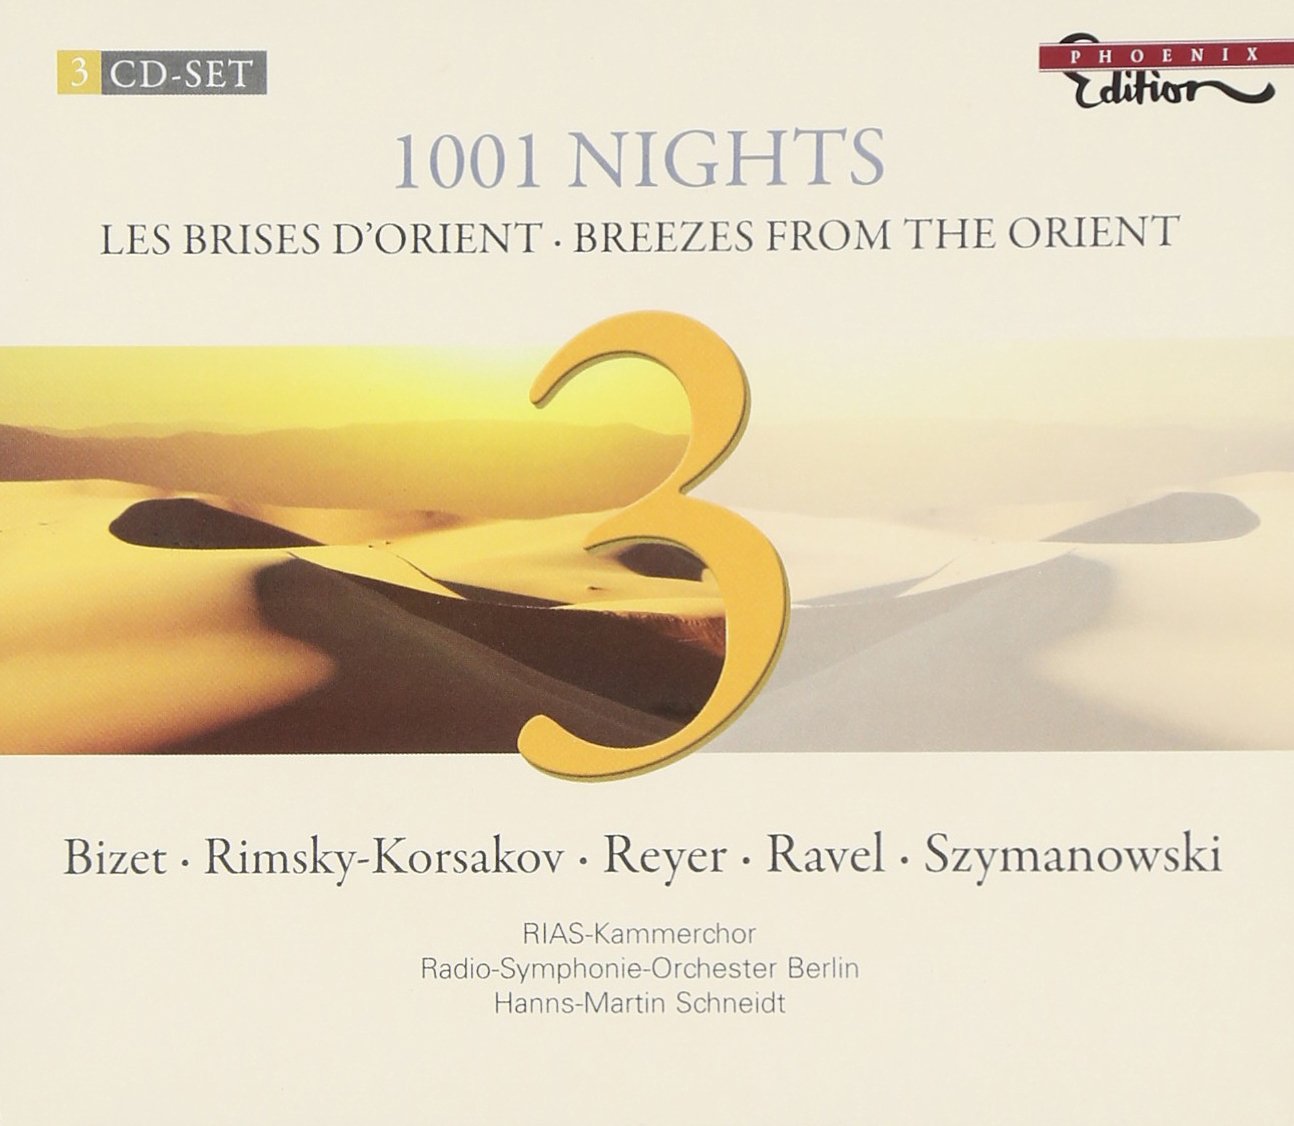 1001 Nights- Vocal & Orchestral Music [3 CDs]